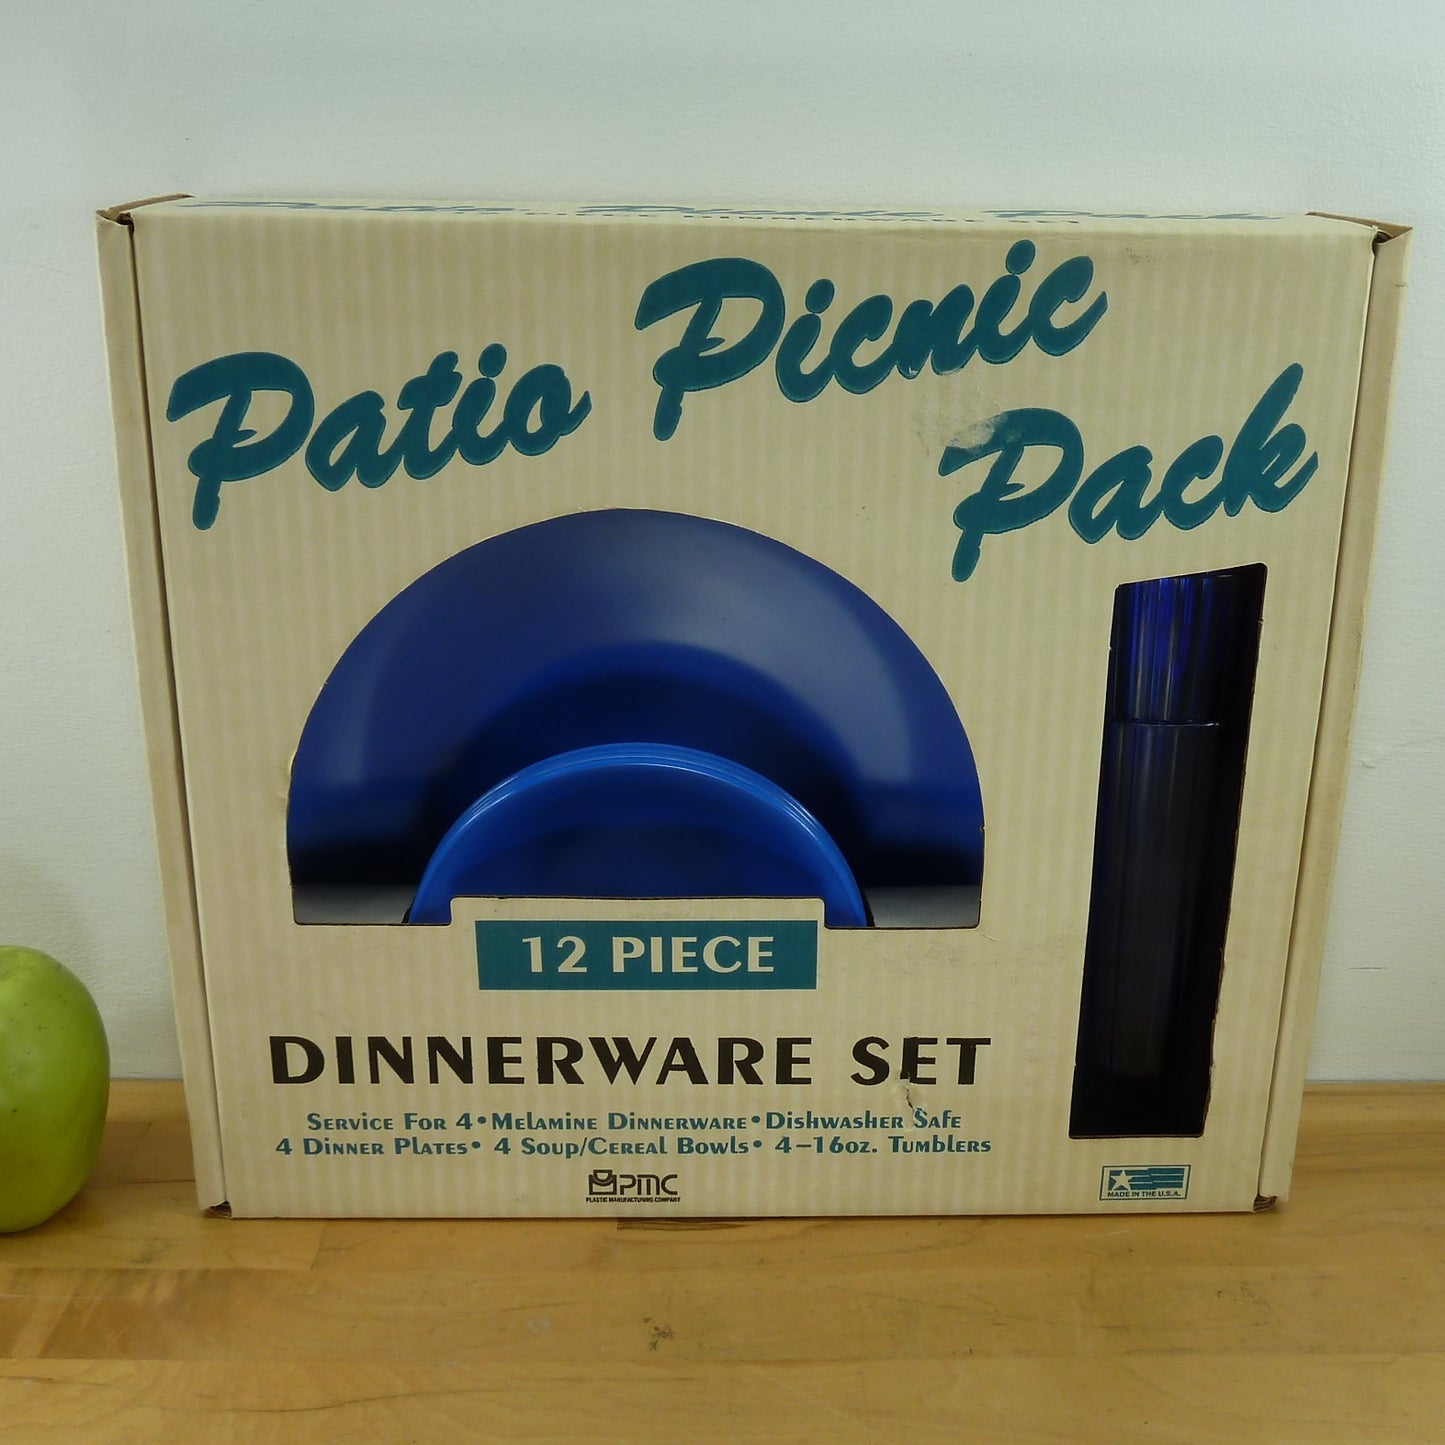 Texas Ware PMC Patio Picnic Pack NOS Boxed 12 Piece Set Dinnerware